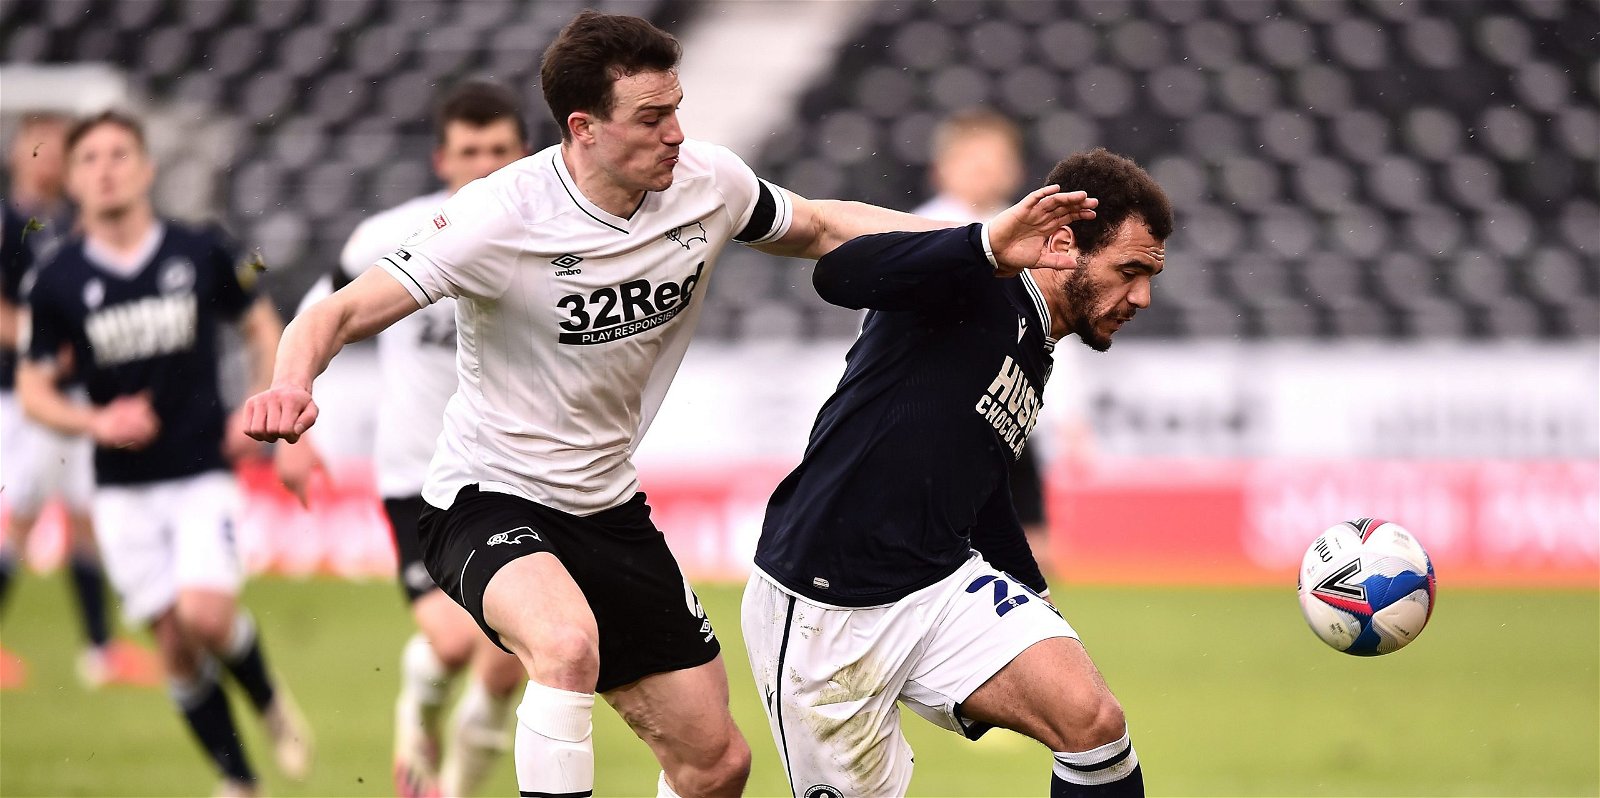 , Rangers transfer rumour suggests on loan Derby defender is surplus to requirements